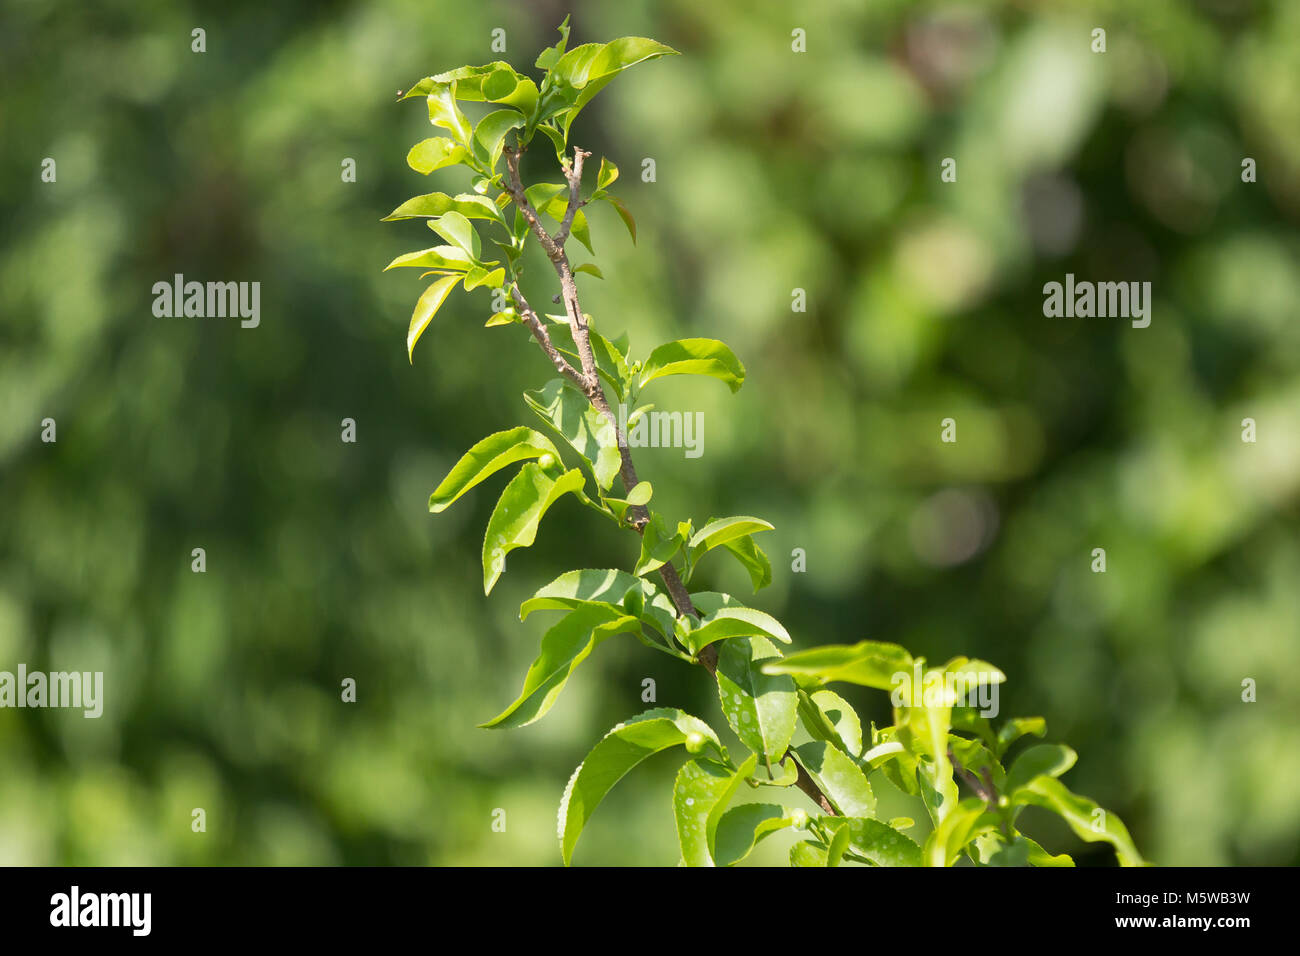 Green leaf of Fried Egg Tree  or  Oncoba spinosa Forssk. Stock Photo